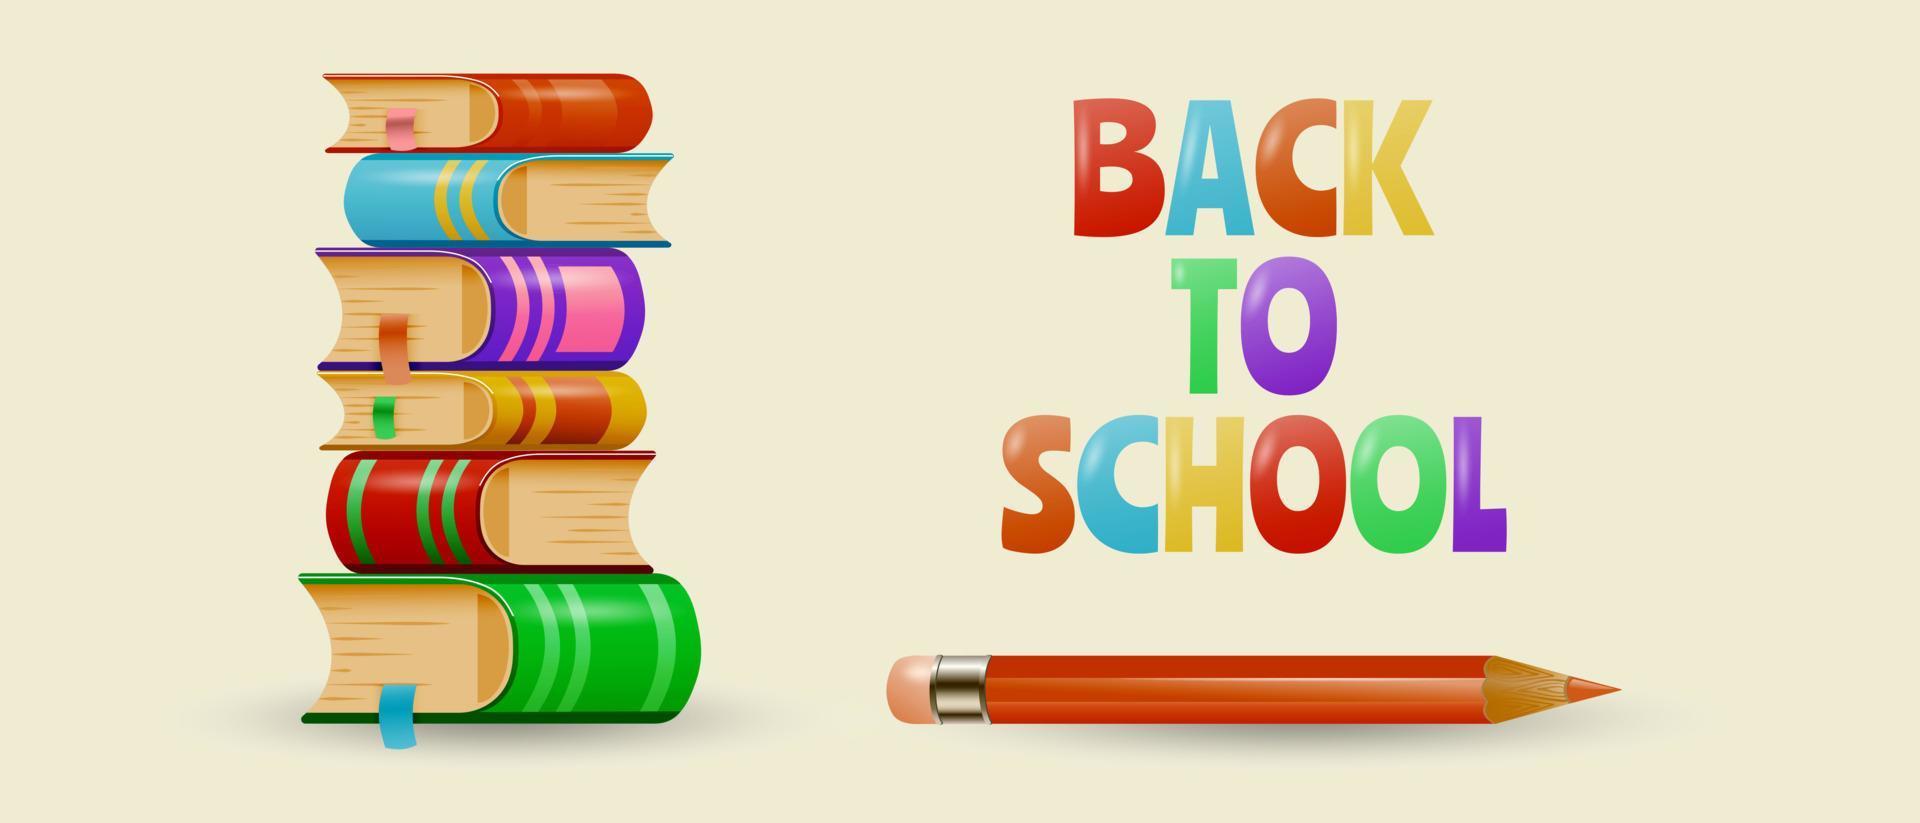 School banner with books and pencil. Back to school background. Vector illustration.